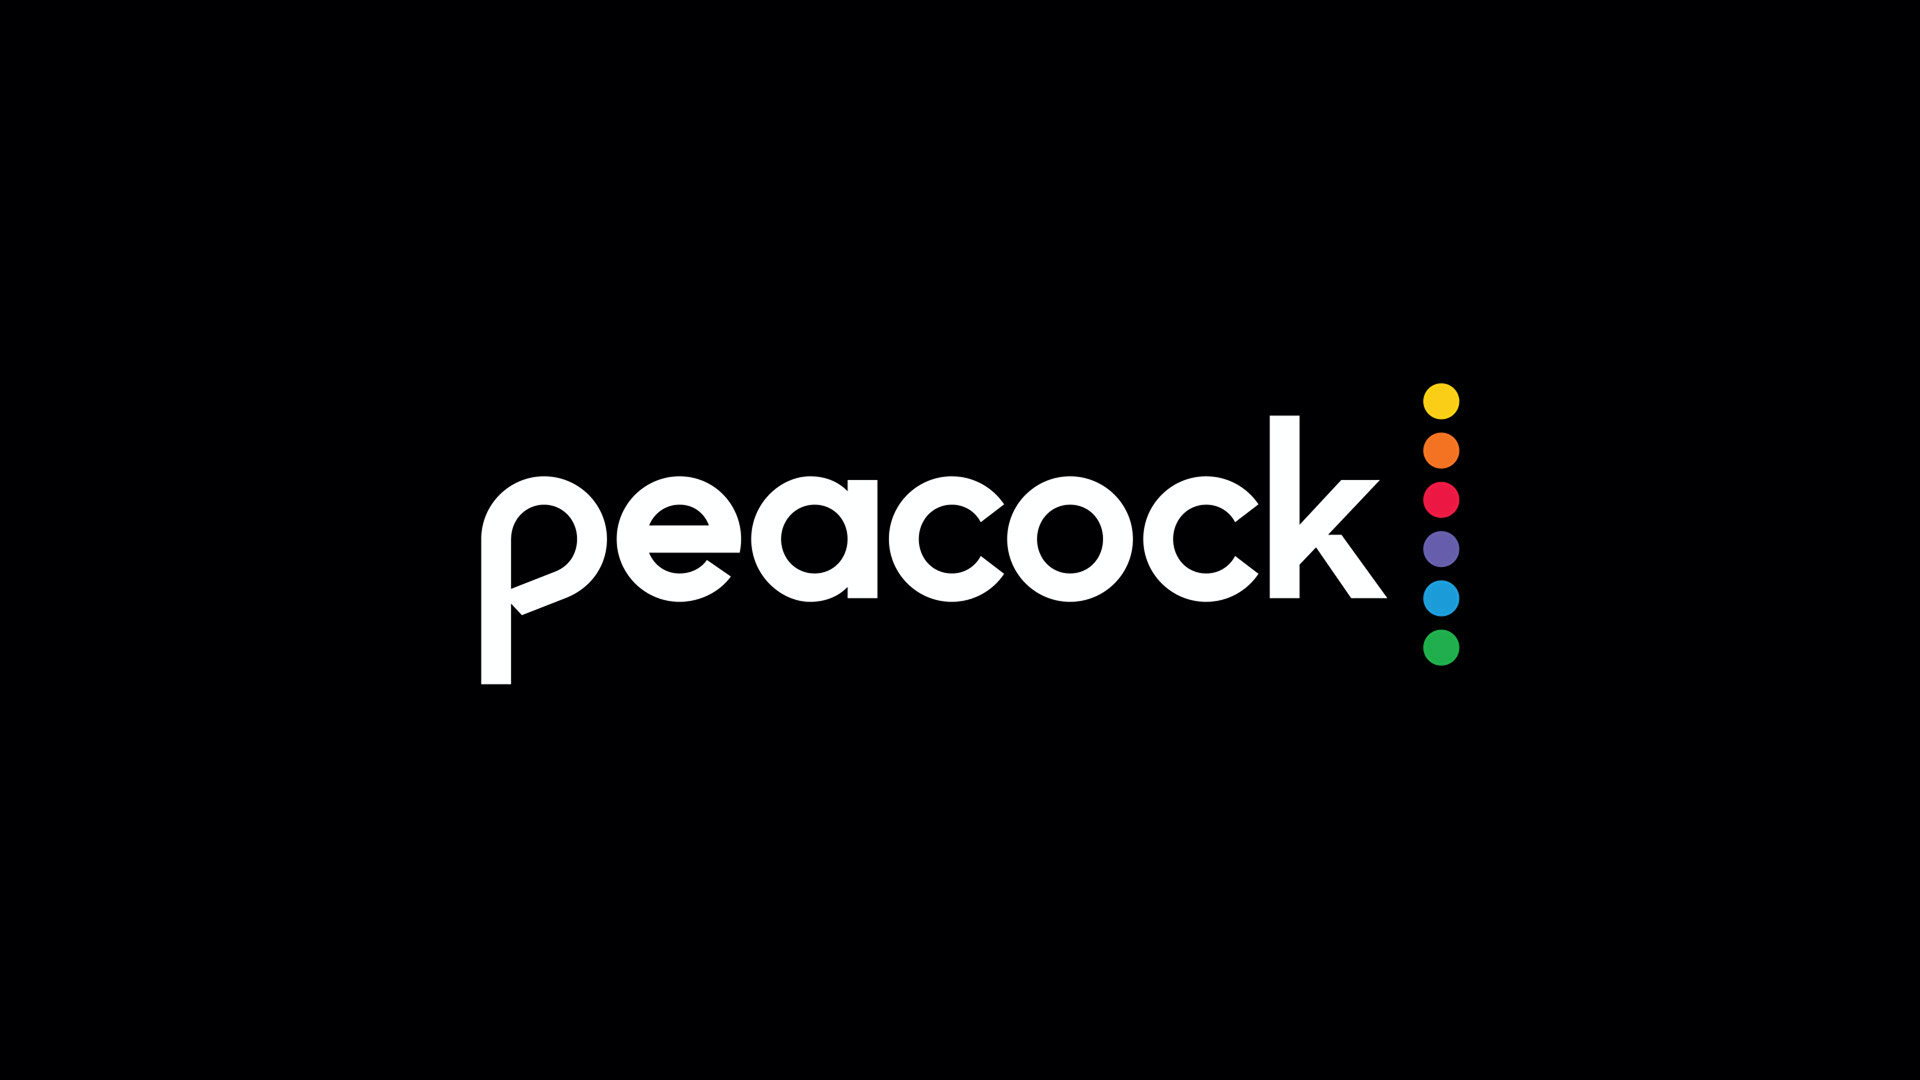 Peacock by NBCUniversal